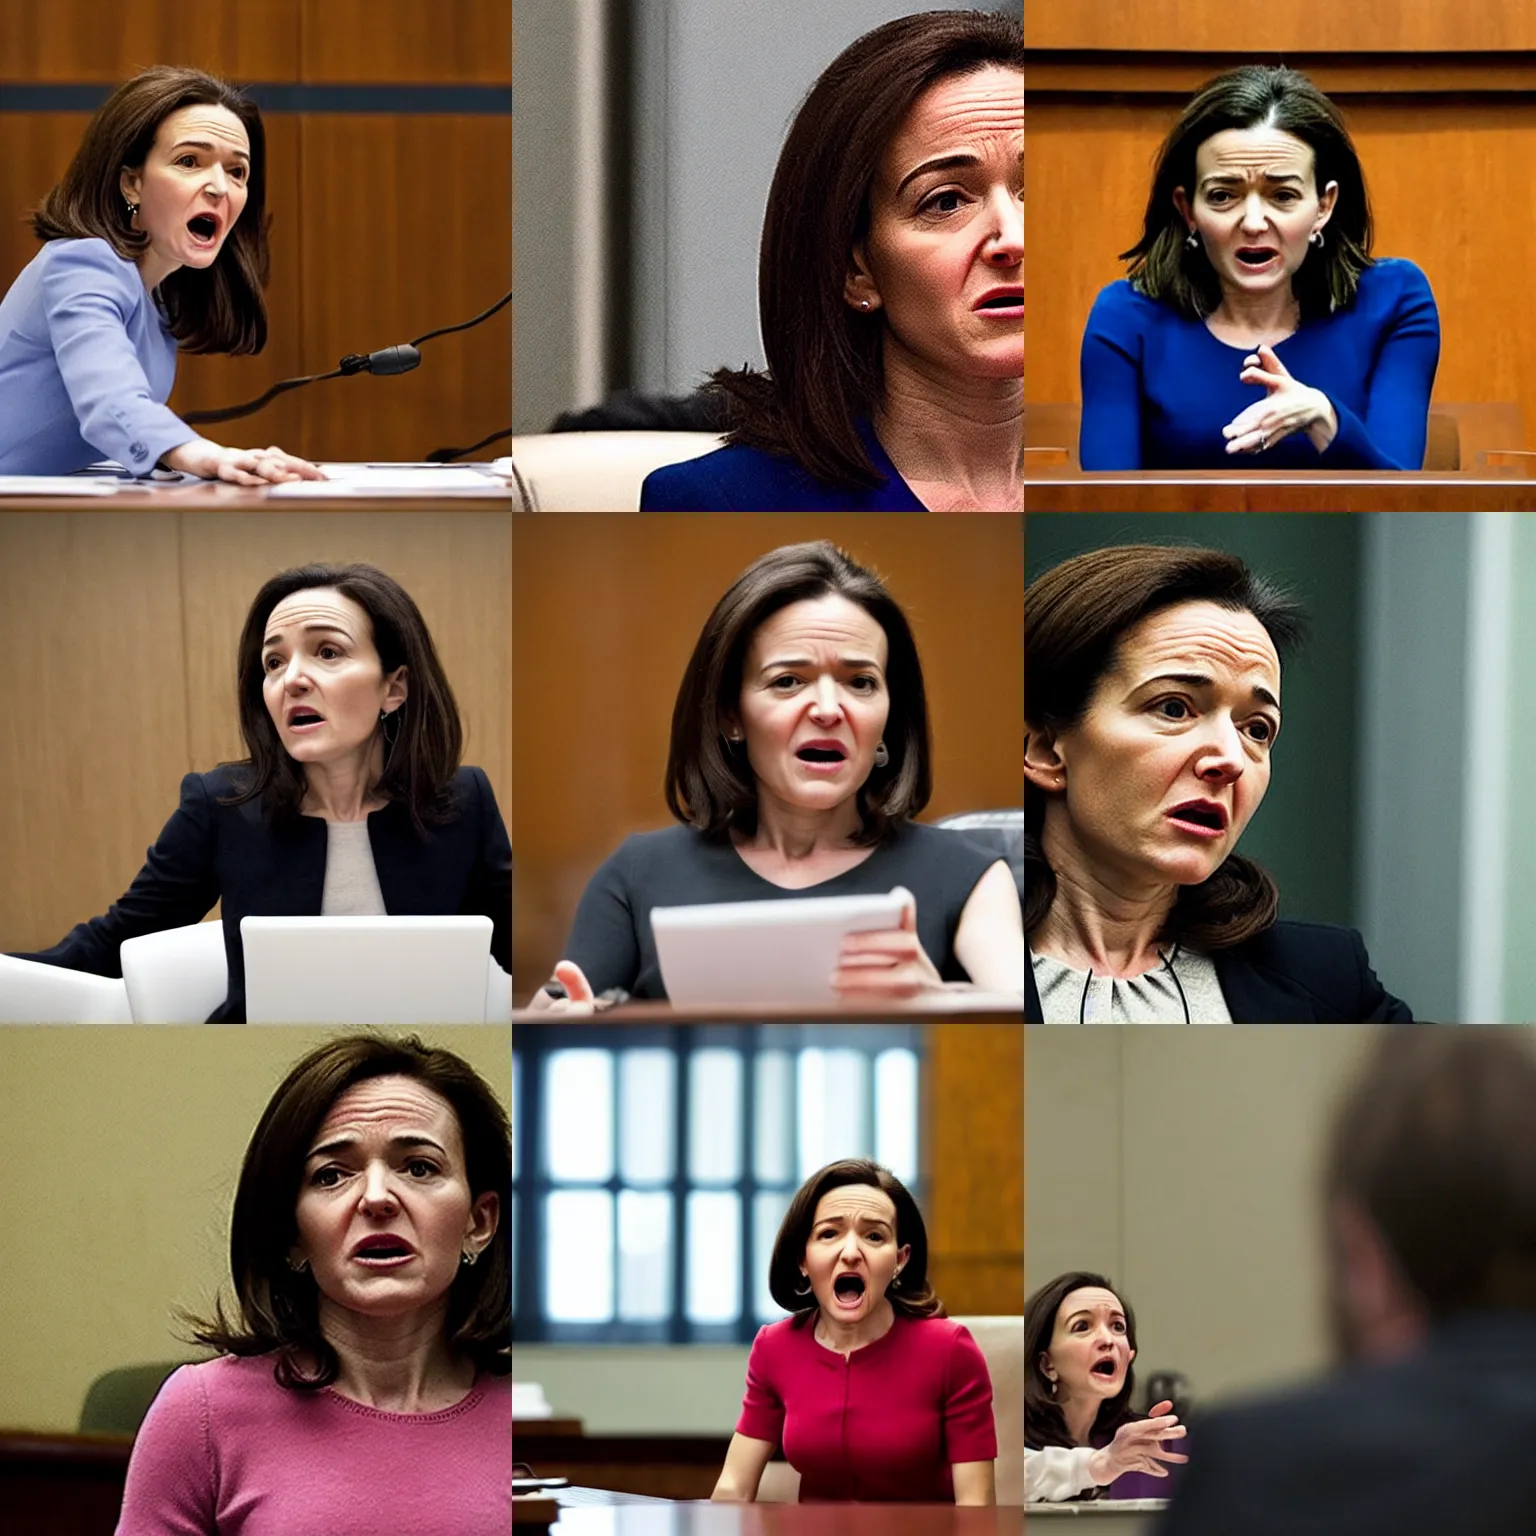 Prompt: Movie still of a furious, screaming Sheryl Sandberg testifying in court in Facebook The Movie (2017), directed by Steven Spielberg